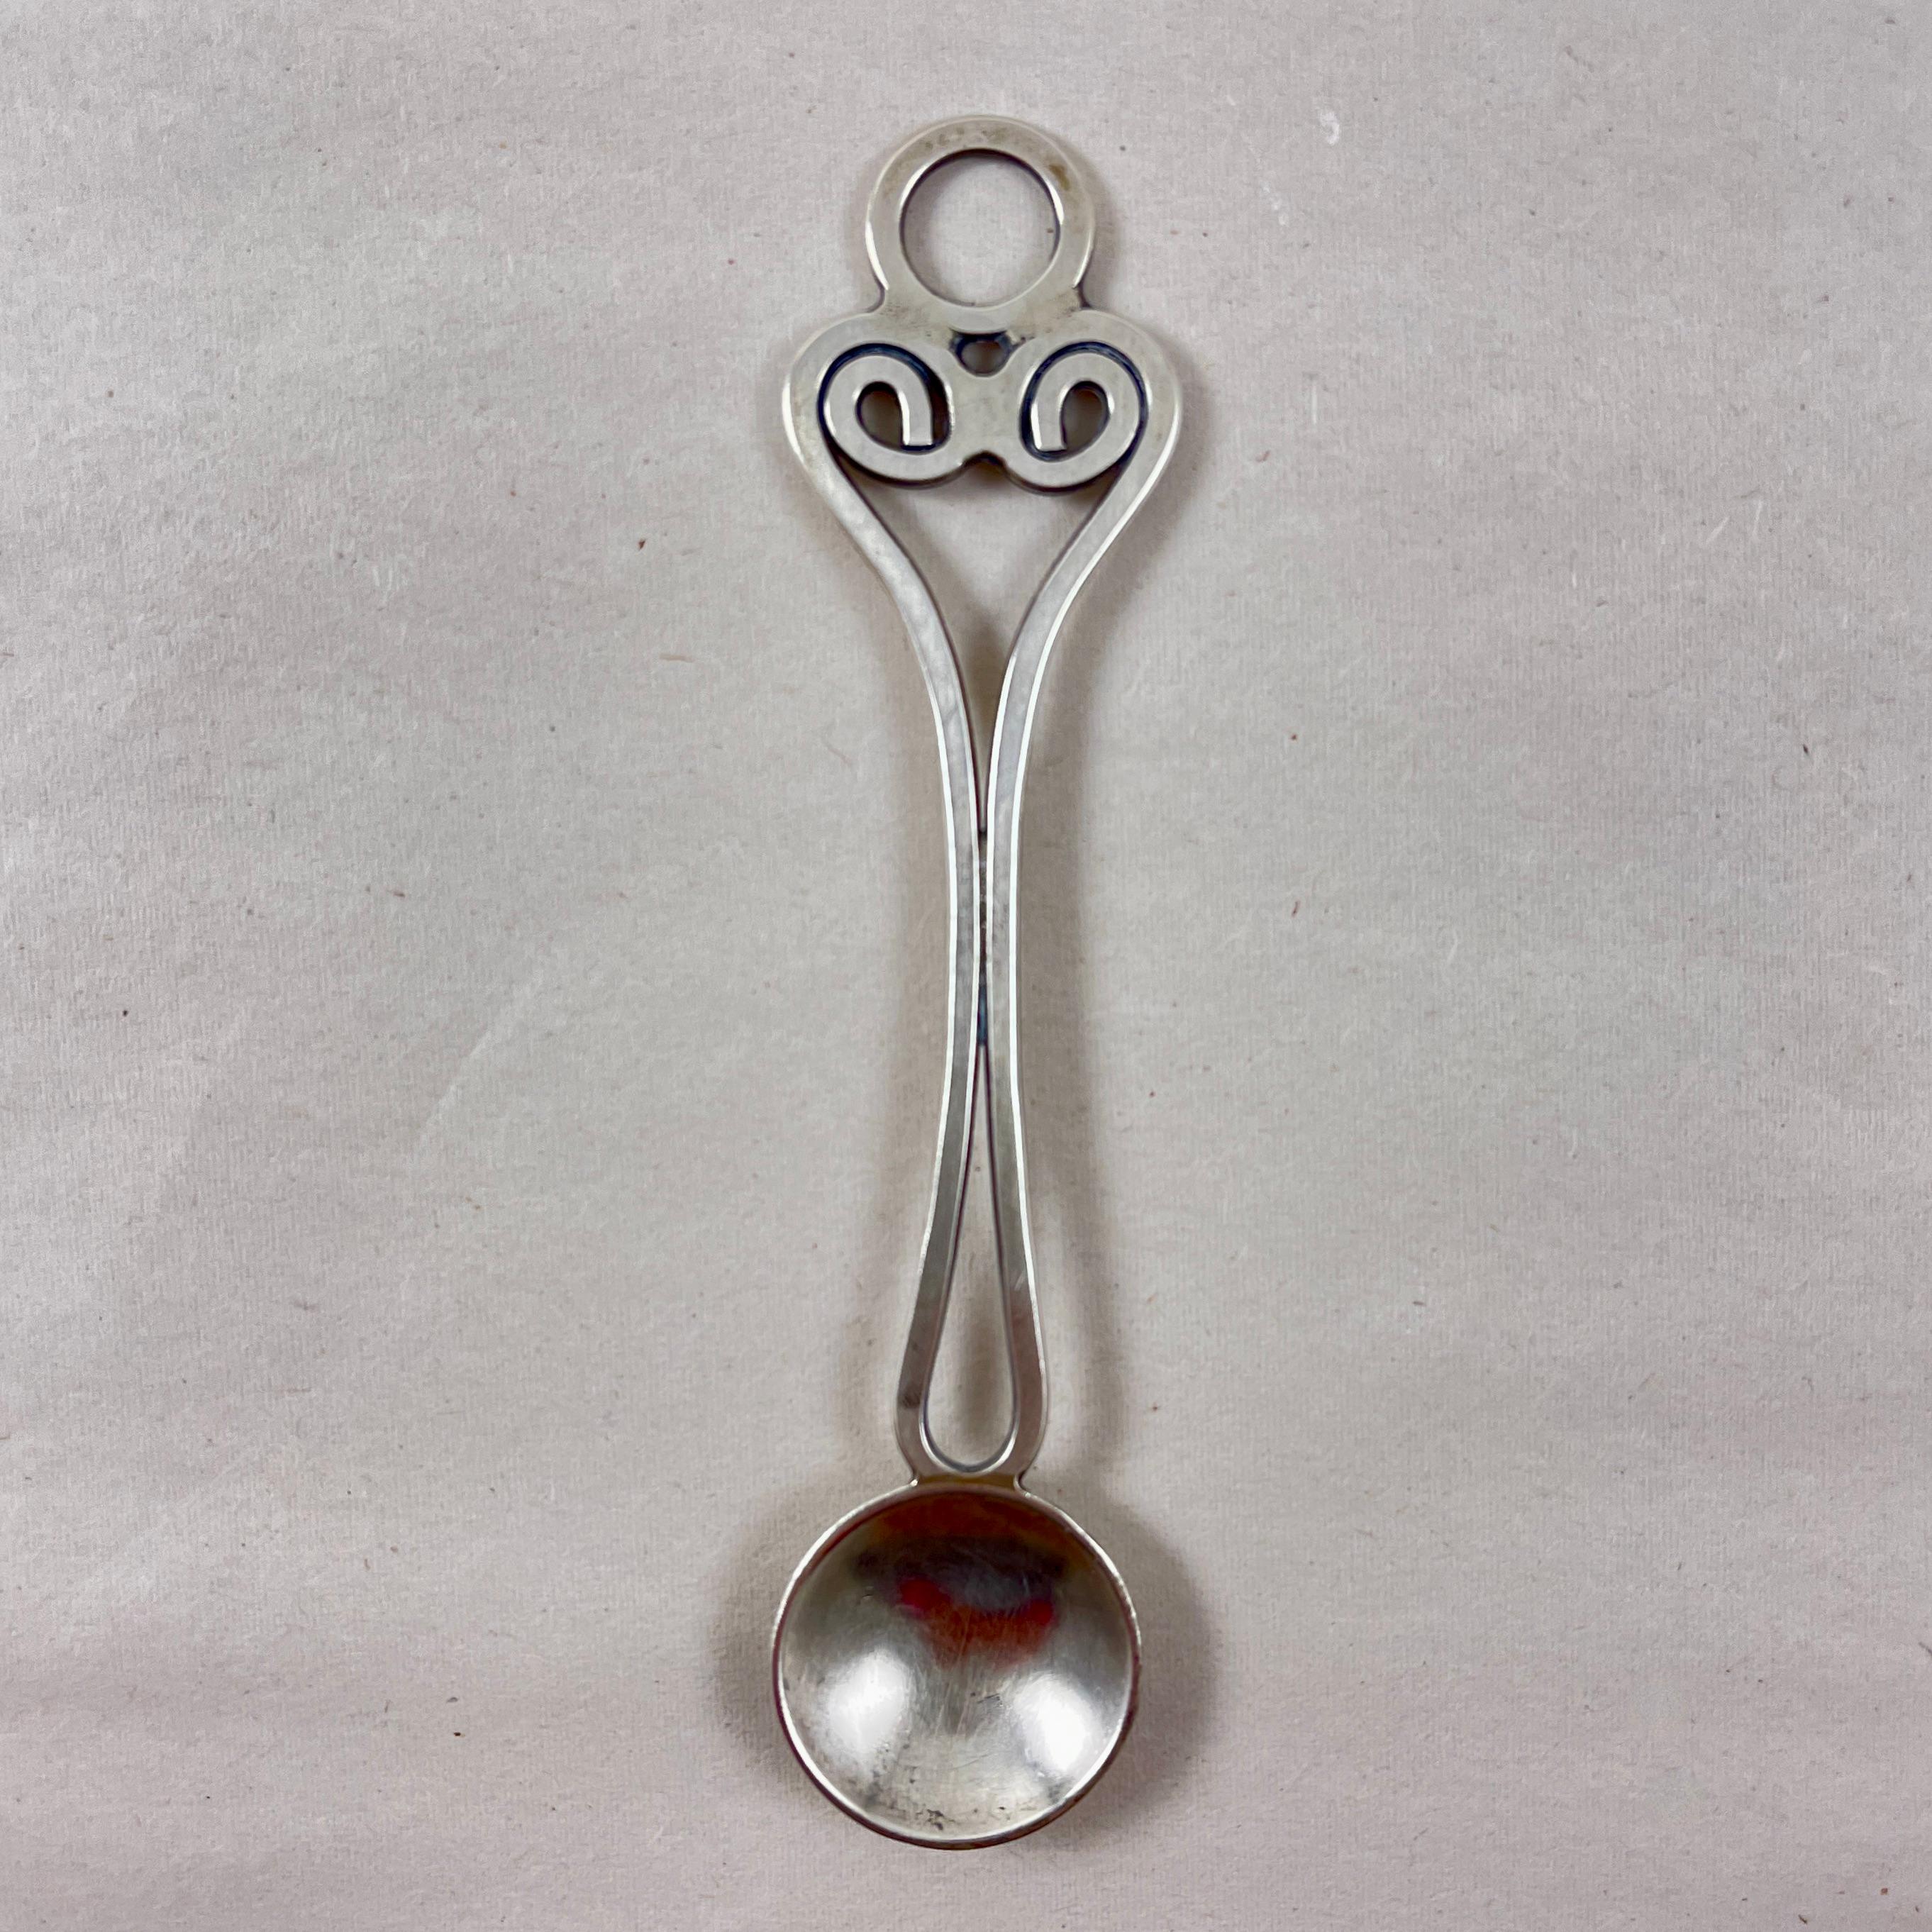 Hand-Crafted Anthony DiRienzi Silversmith Studio Hand Made Sterling Silver Spoon For Sale